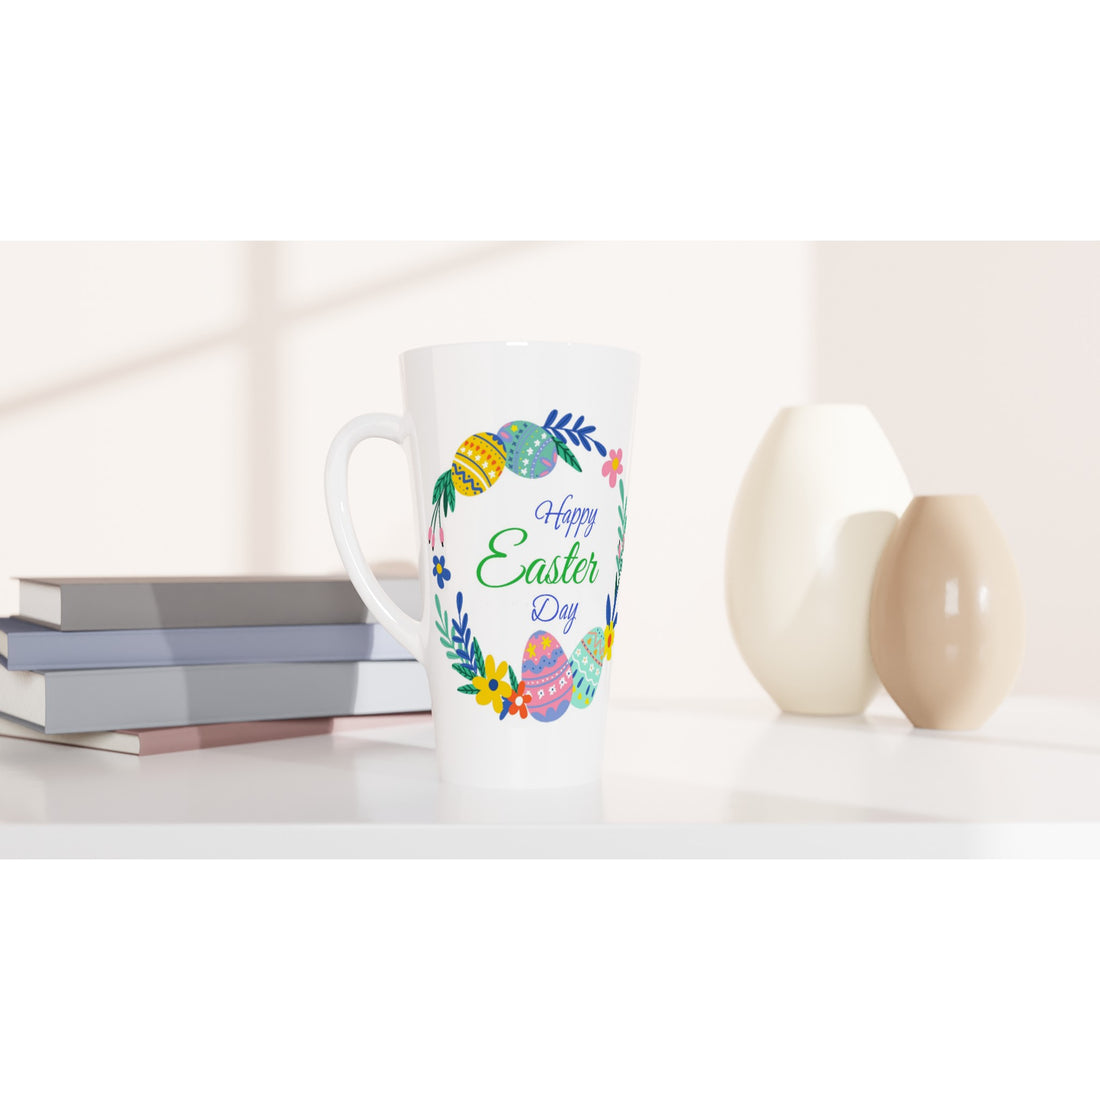 Happy Easter Day Ceramic Mug Home-clothes-jewelry